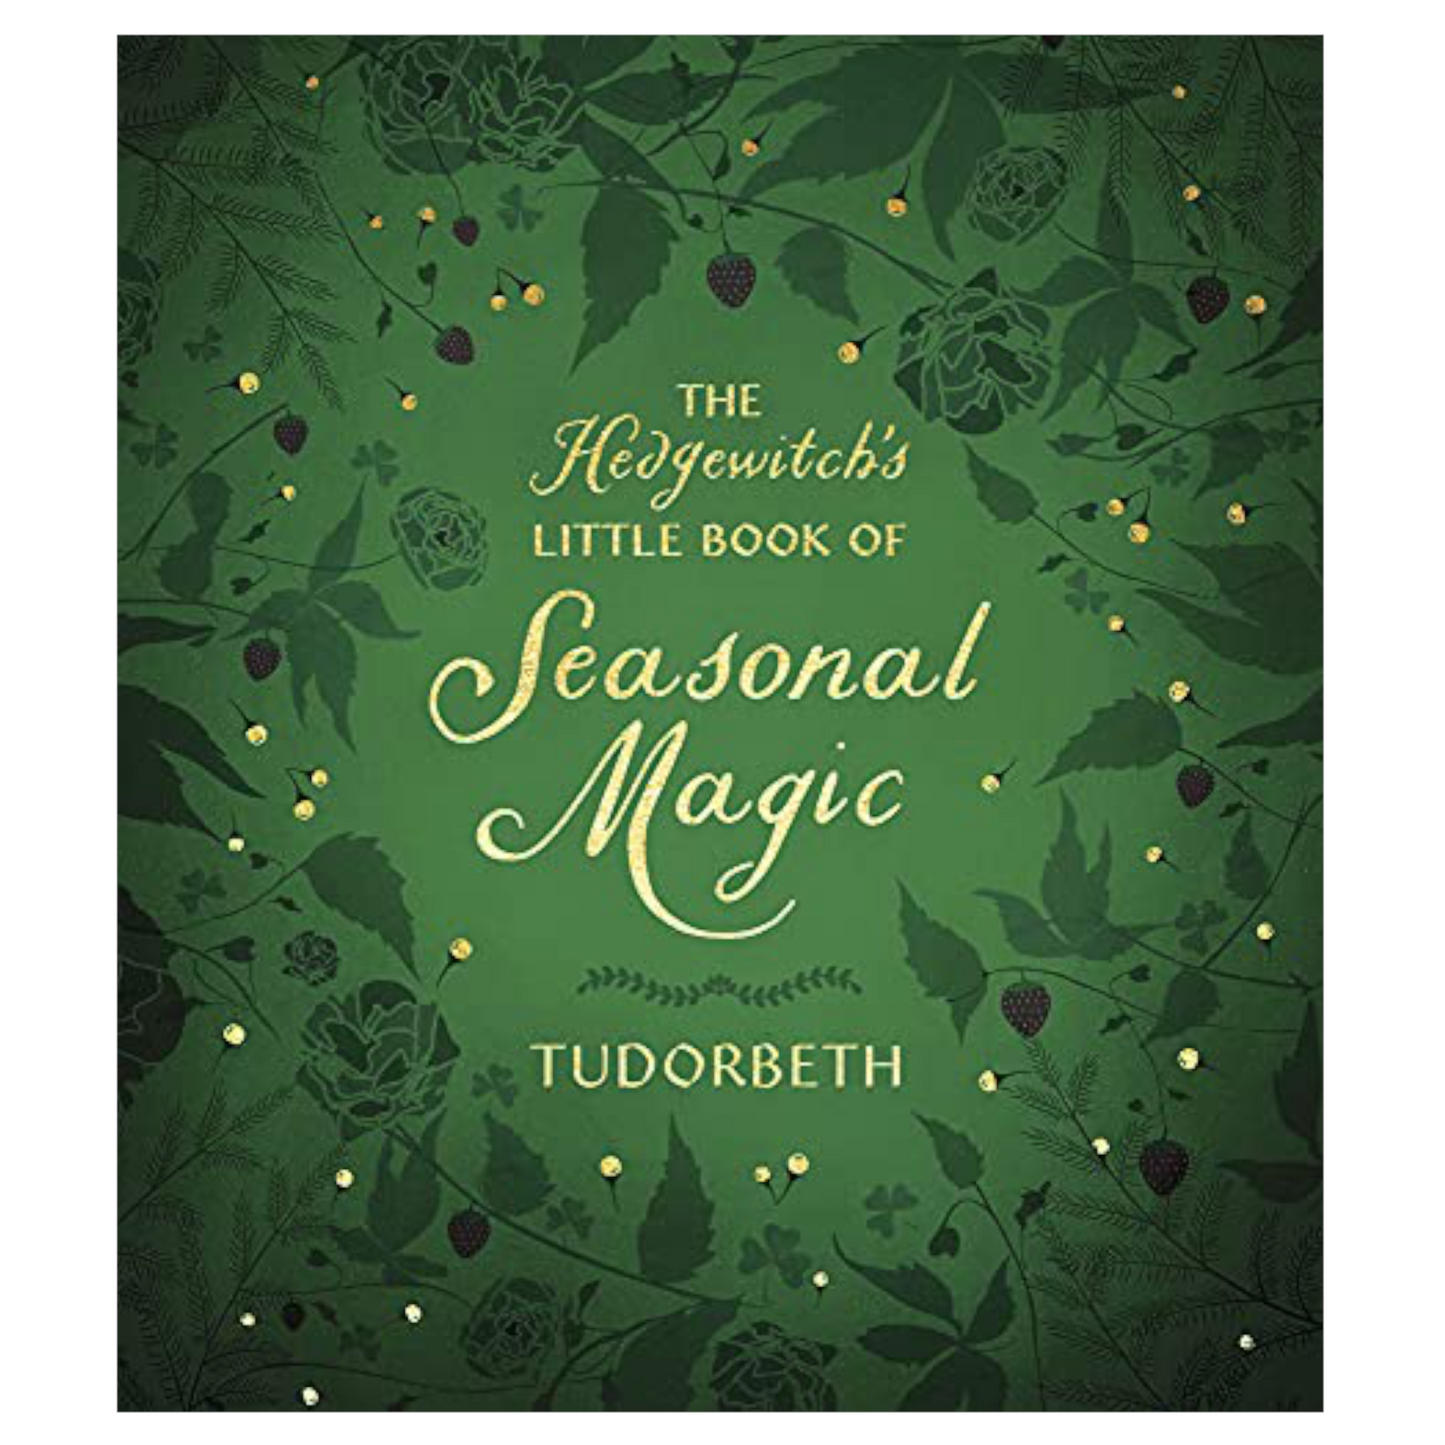 The Hedgewitch’s Little Book of Seasonal Magic